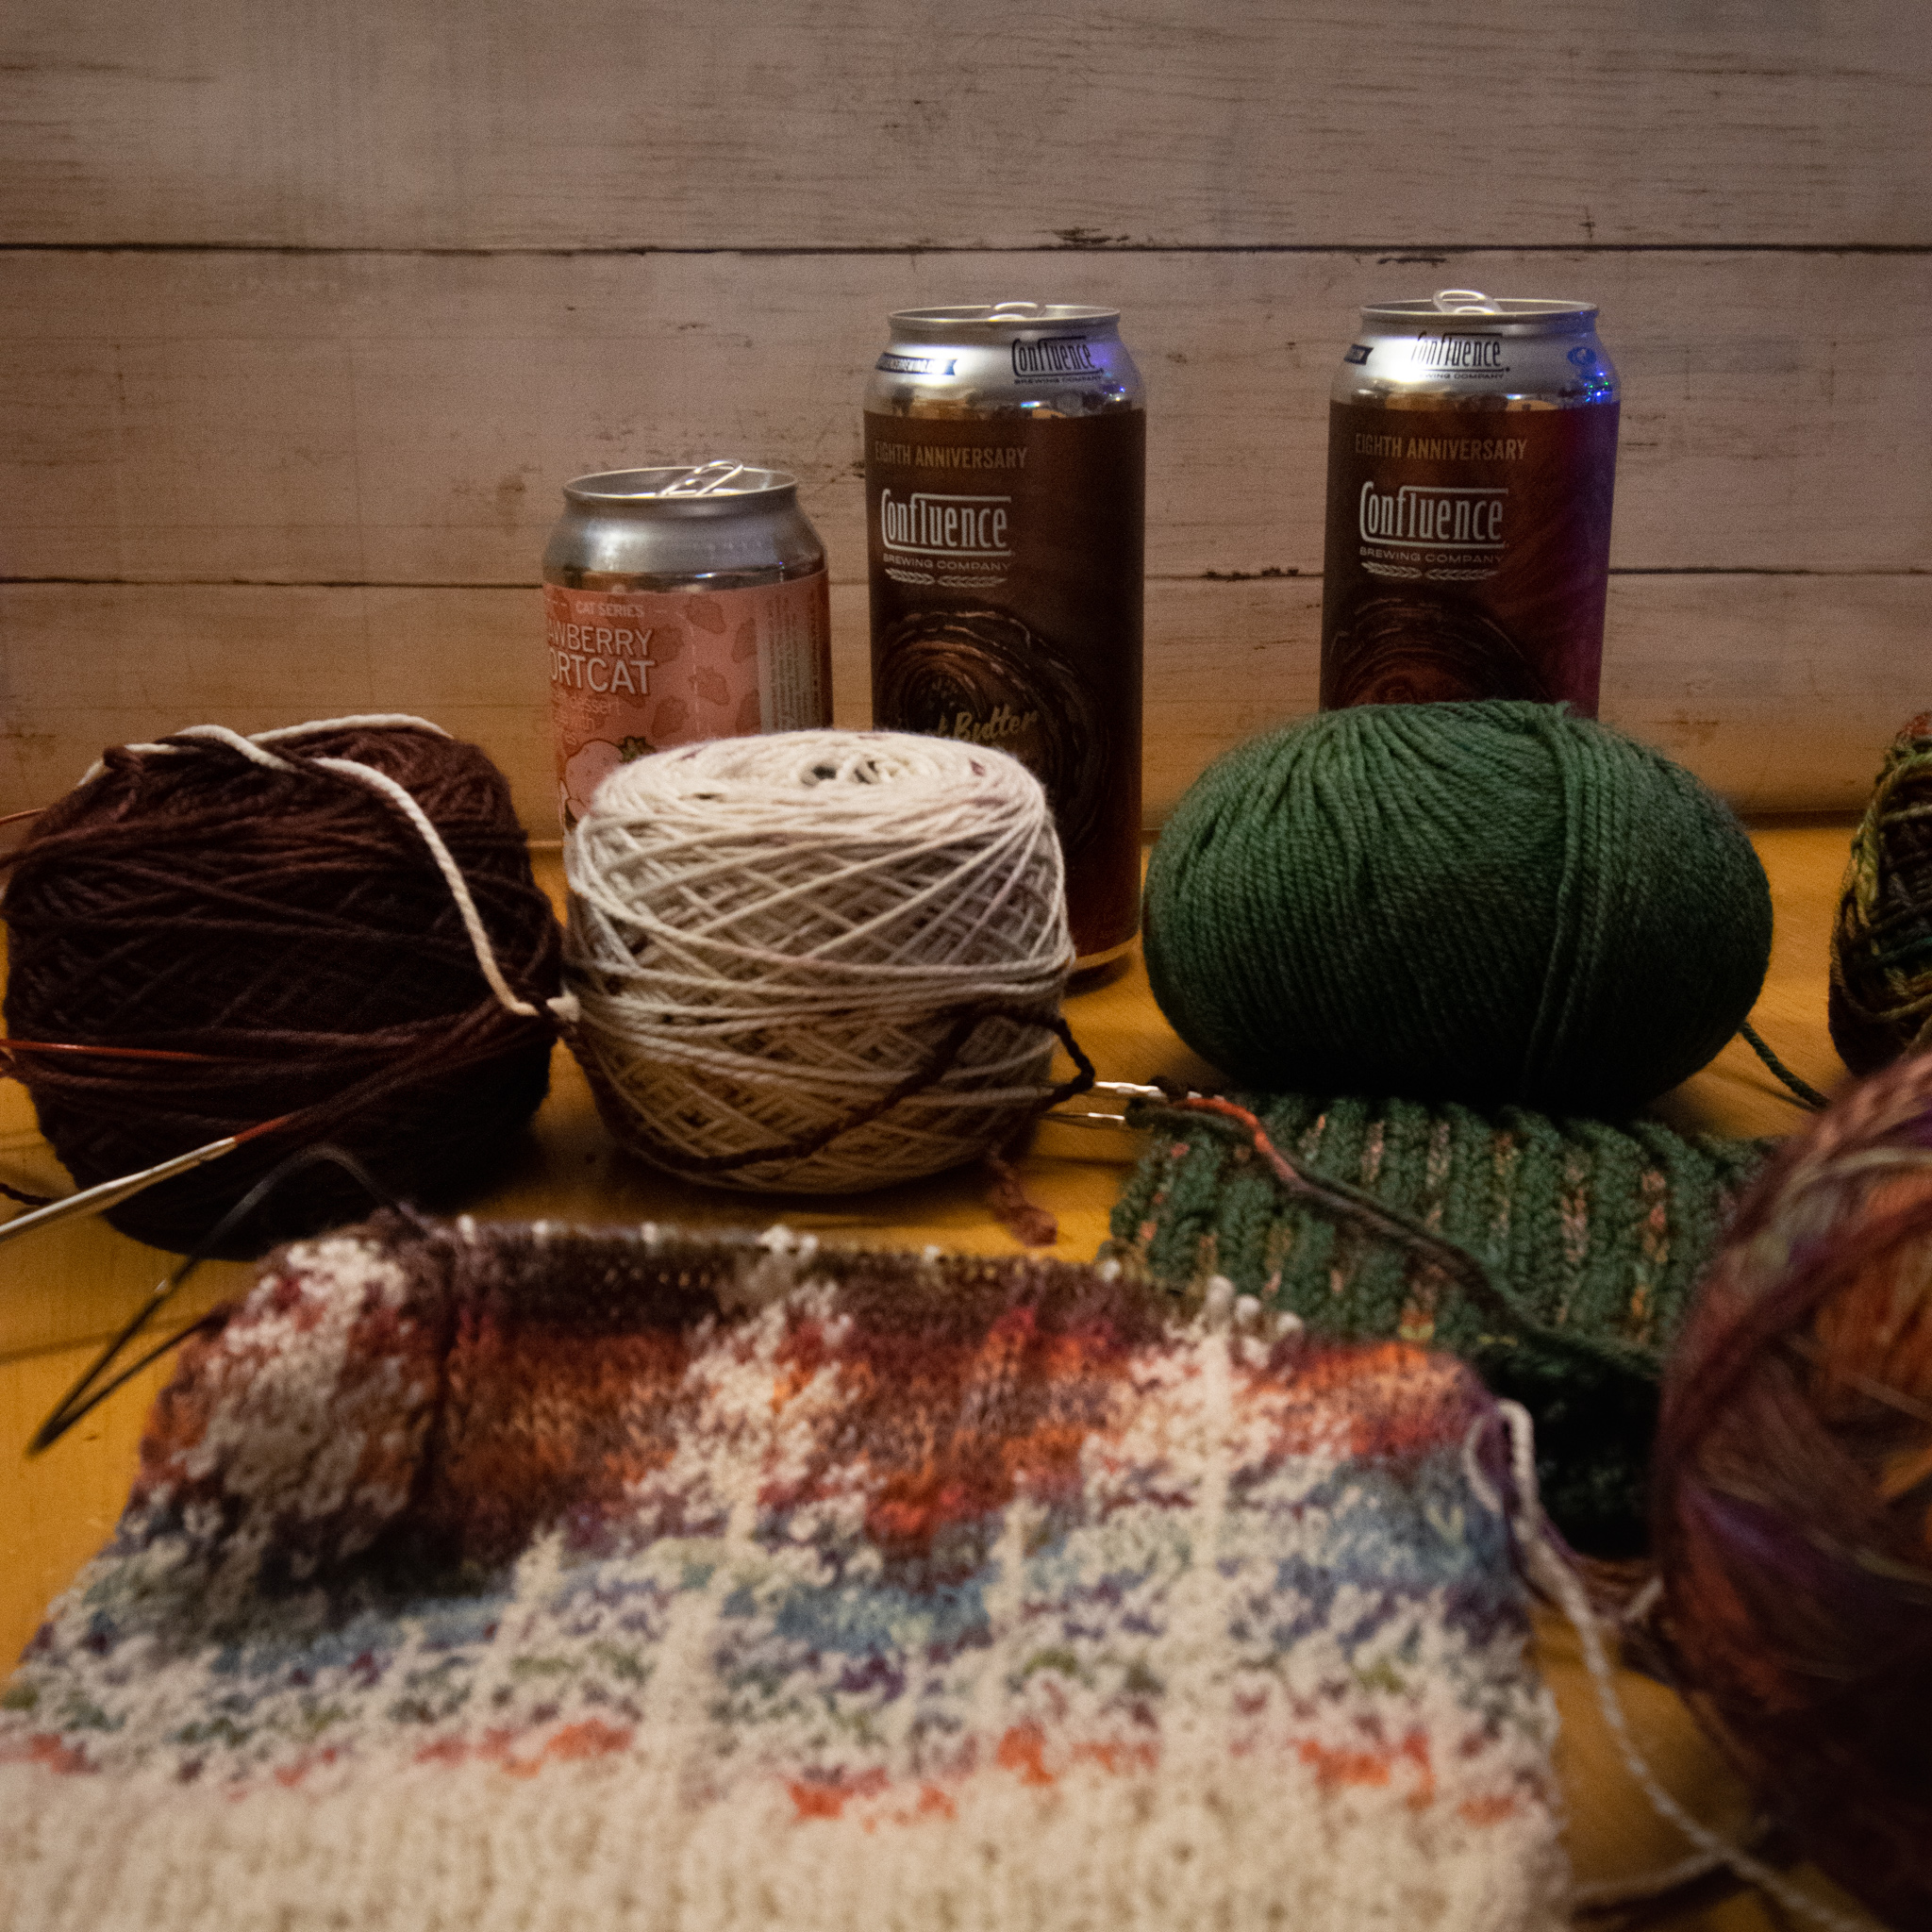 Yarn Balls and Beer Cans